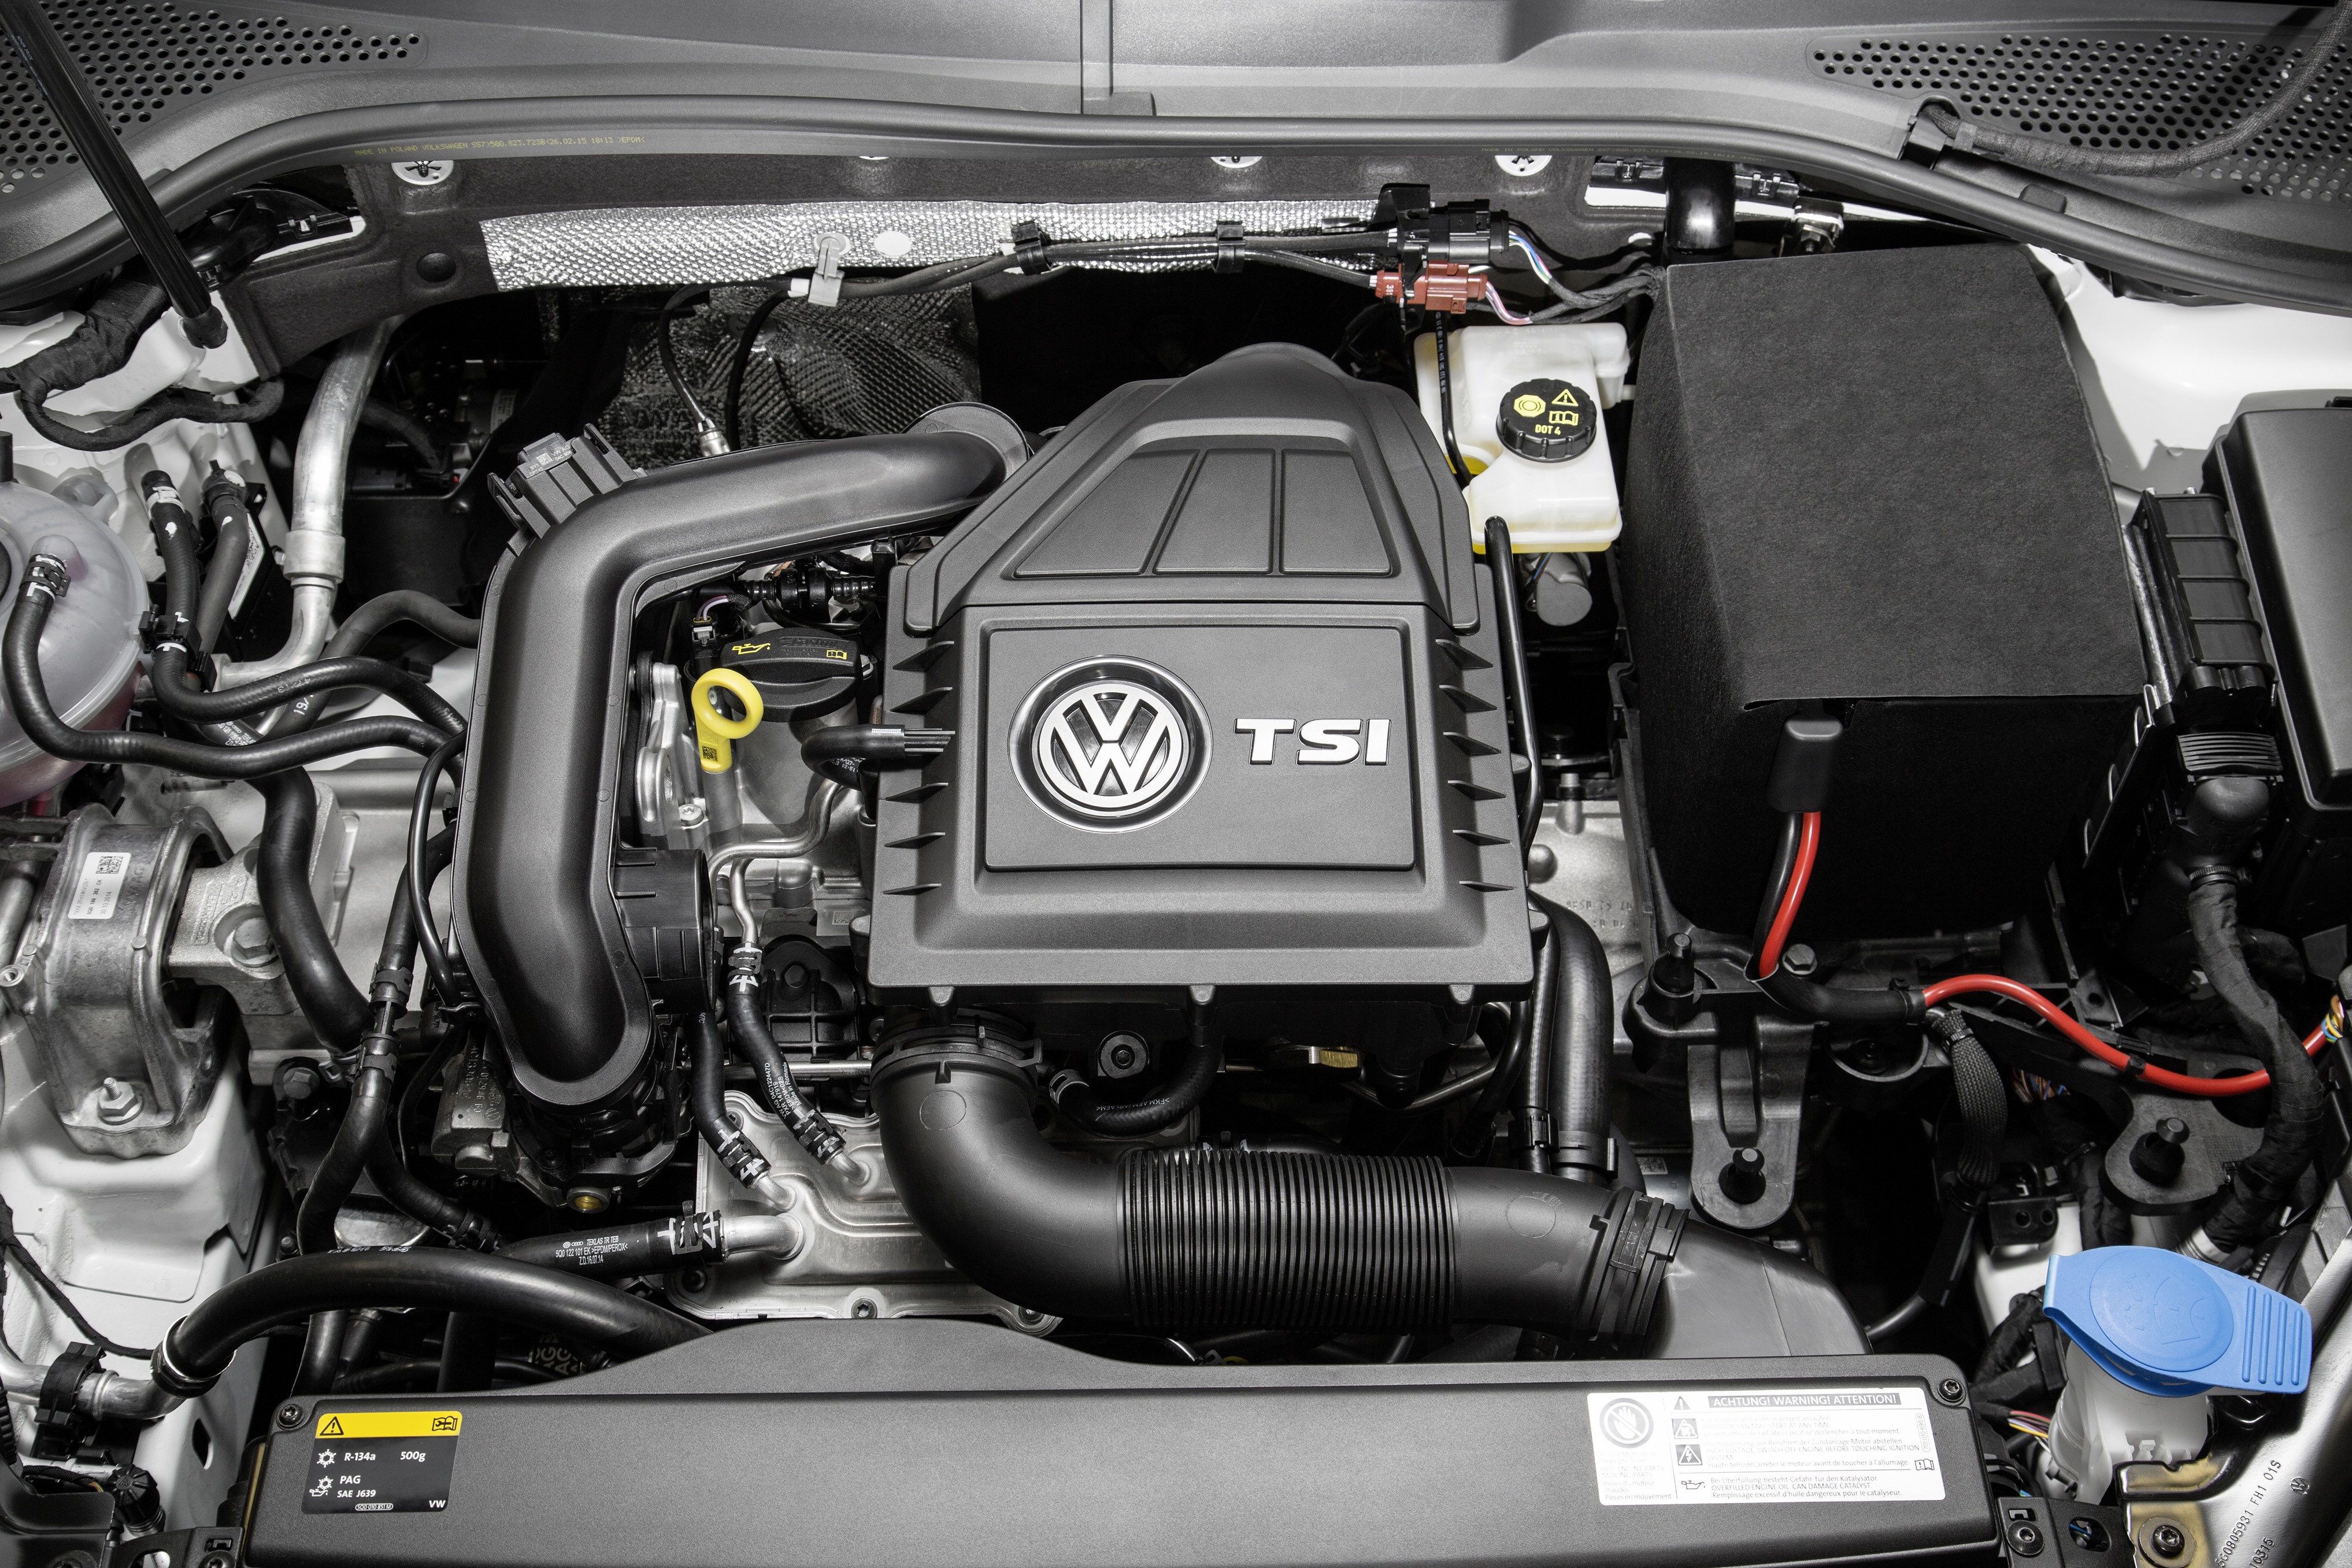 Volkswagen Golf 1 0 Tsi Bluemotion Debuts With 3 Cylinder Turbo Engine